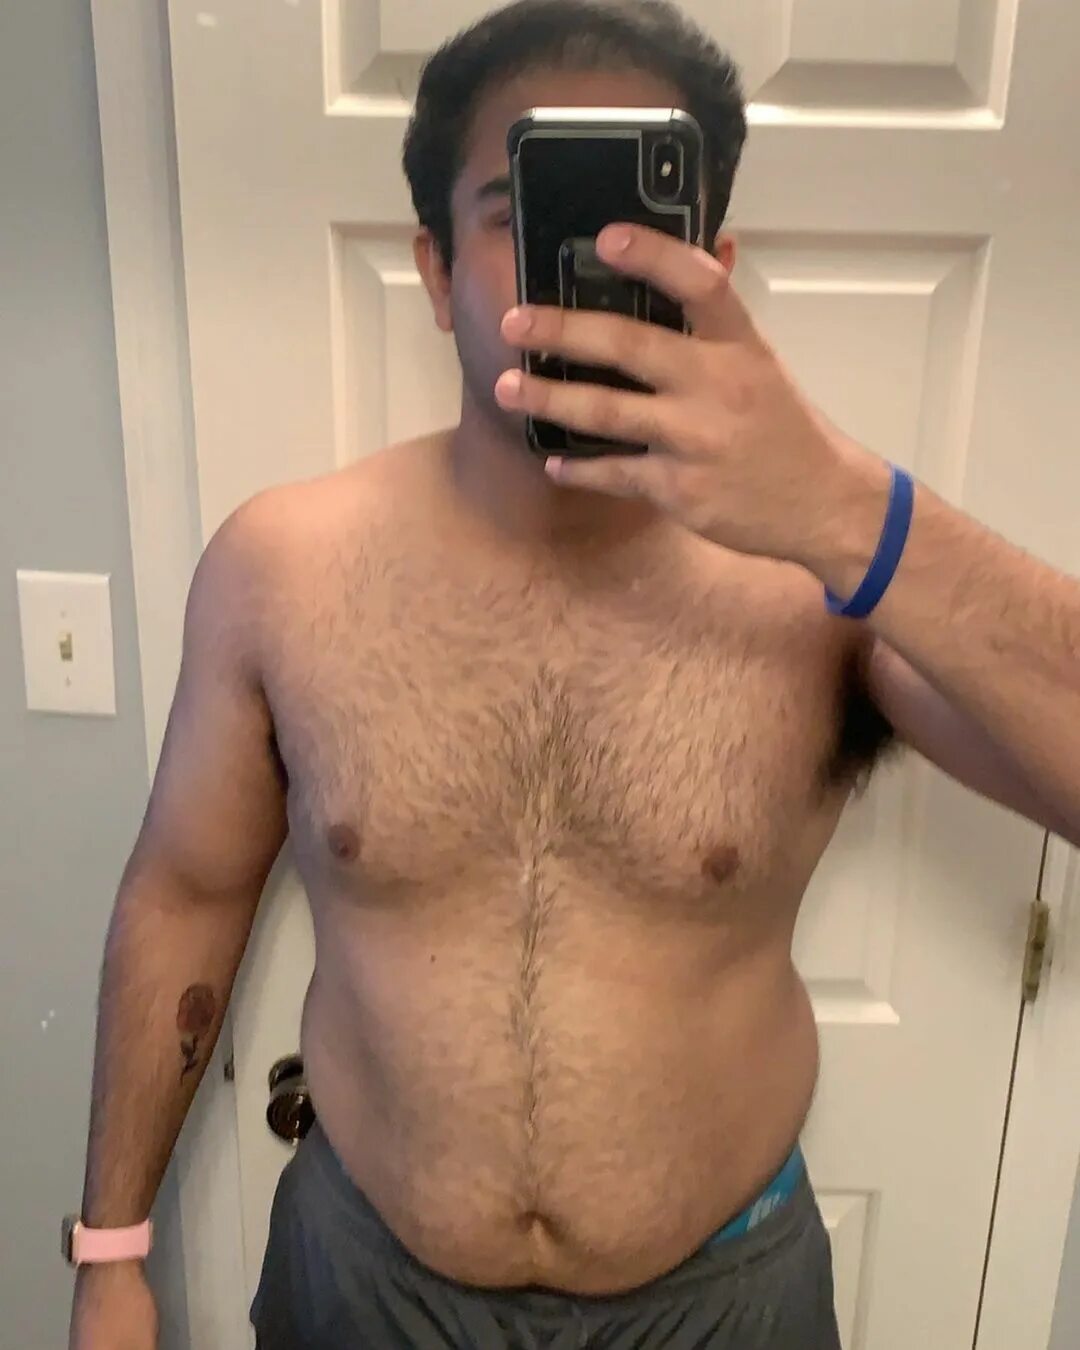 I weighed 235lbs at 6’0"with almost no muscle. 